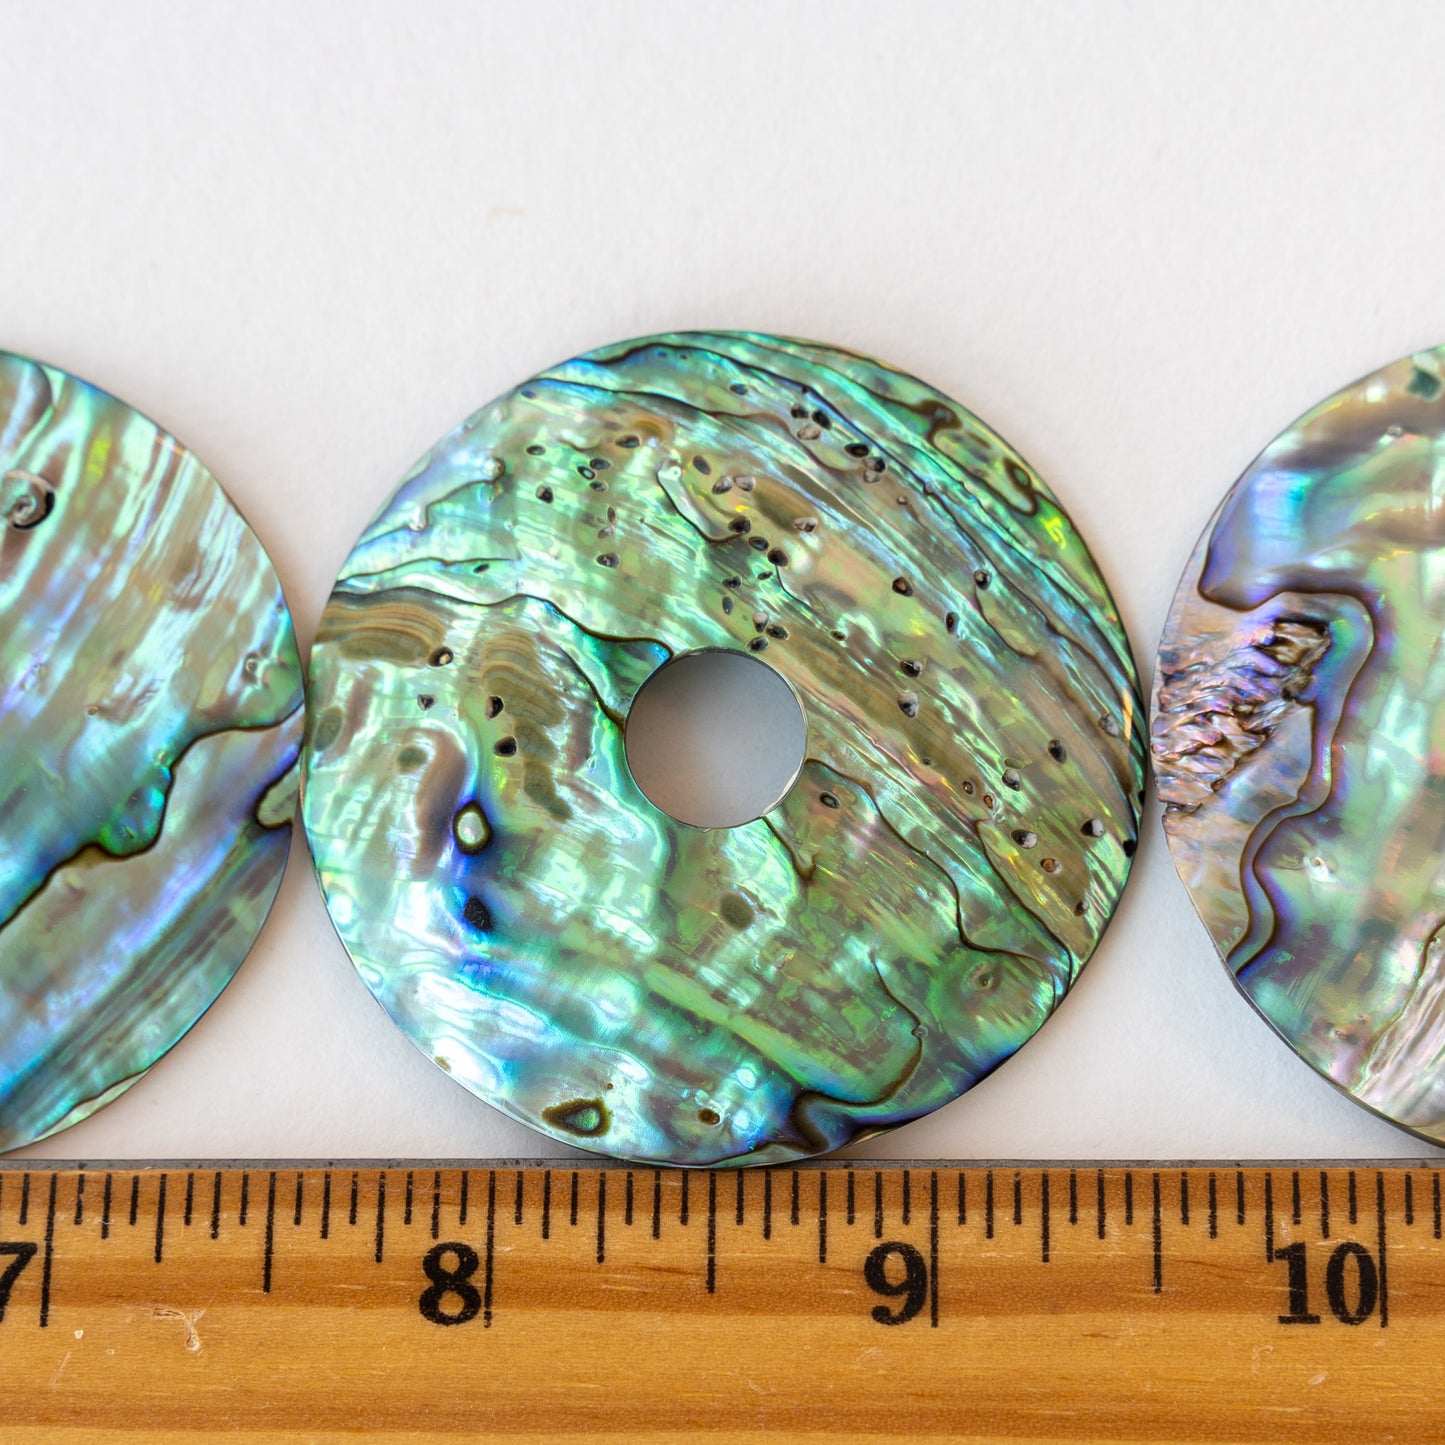 Large 50mm Abalone Disk - One Disk